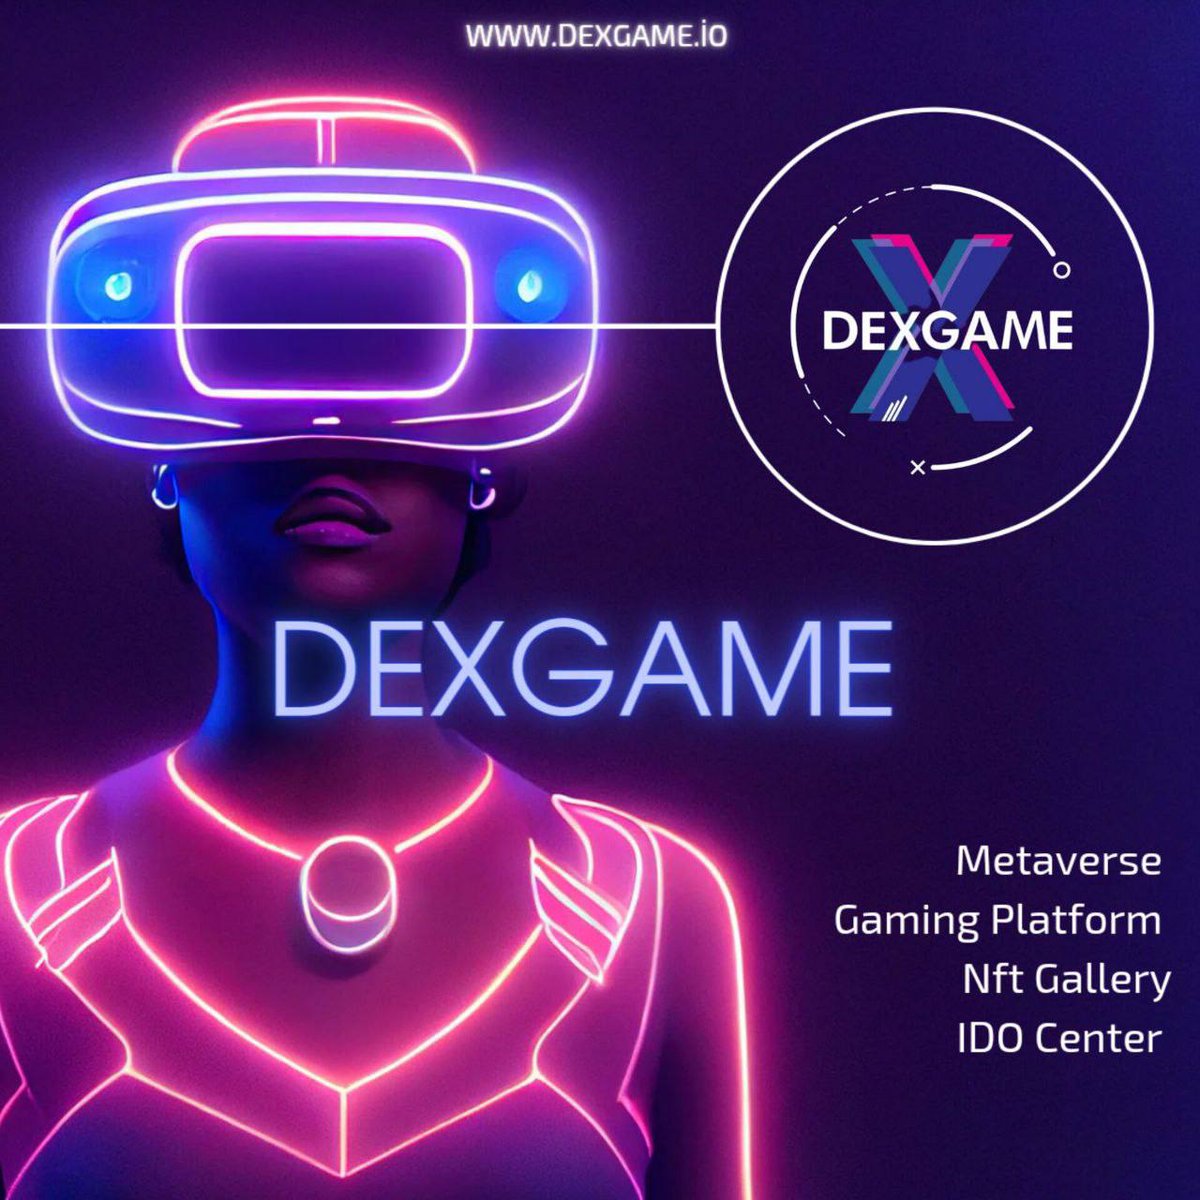 The metaverse concept behind DEXGame is inclusive and welcoming to all types of gaming enthusiasts.
$dxgm 😉 #btc 🤑 #dxgm 🍀 #dexgame 🌟 #ai ♥️ #oxro 😎